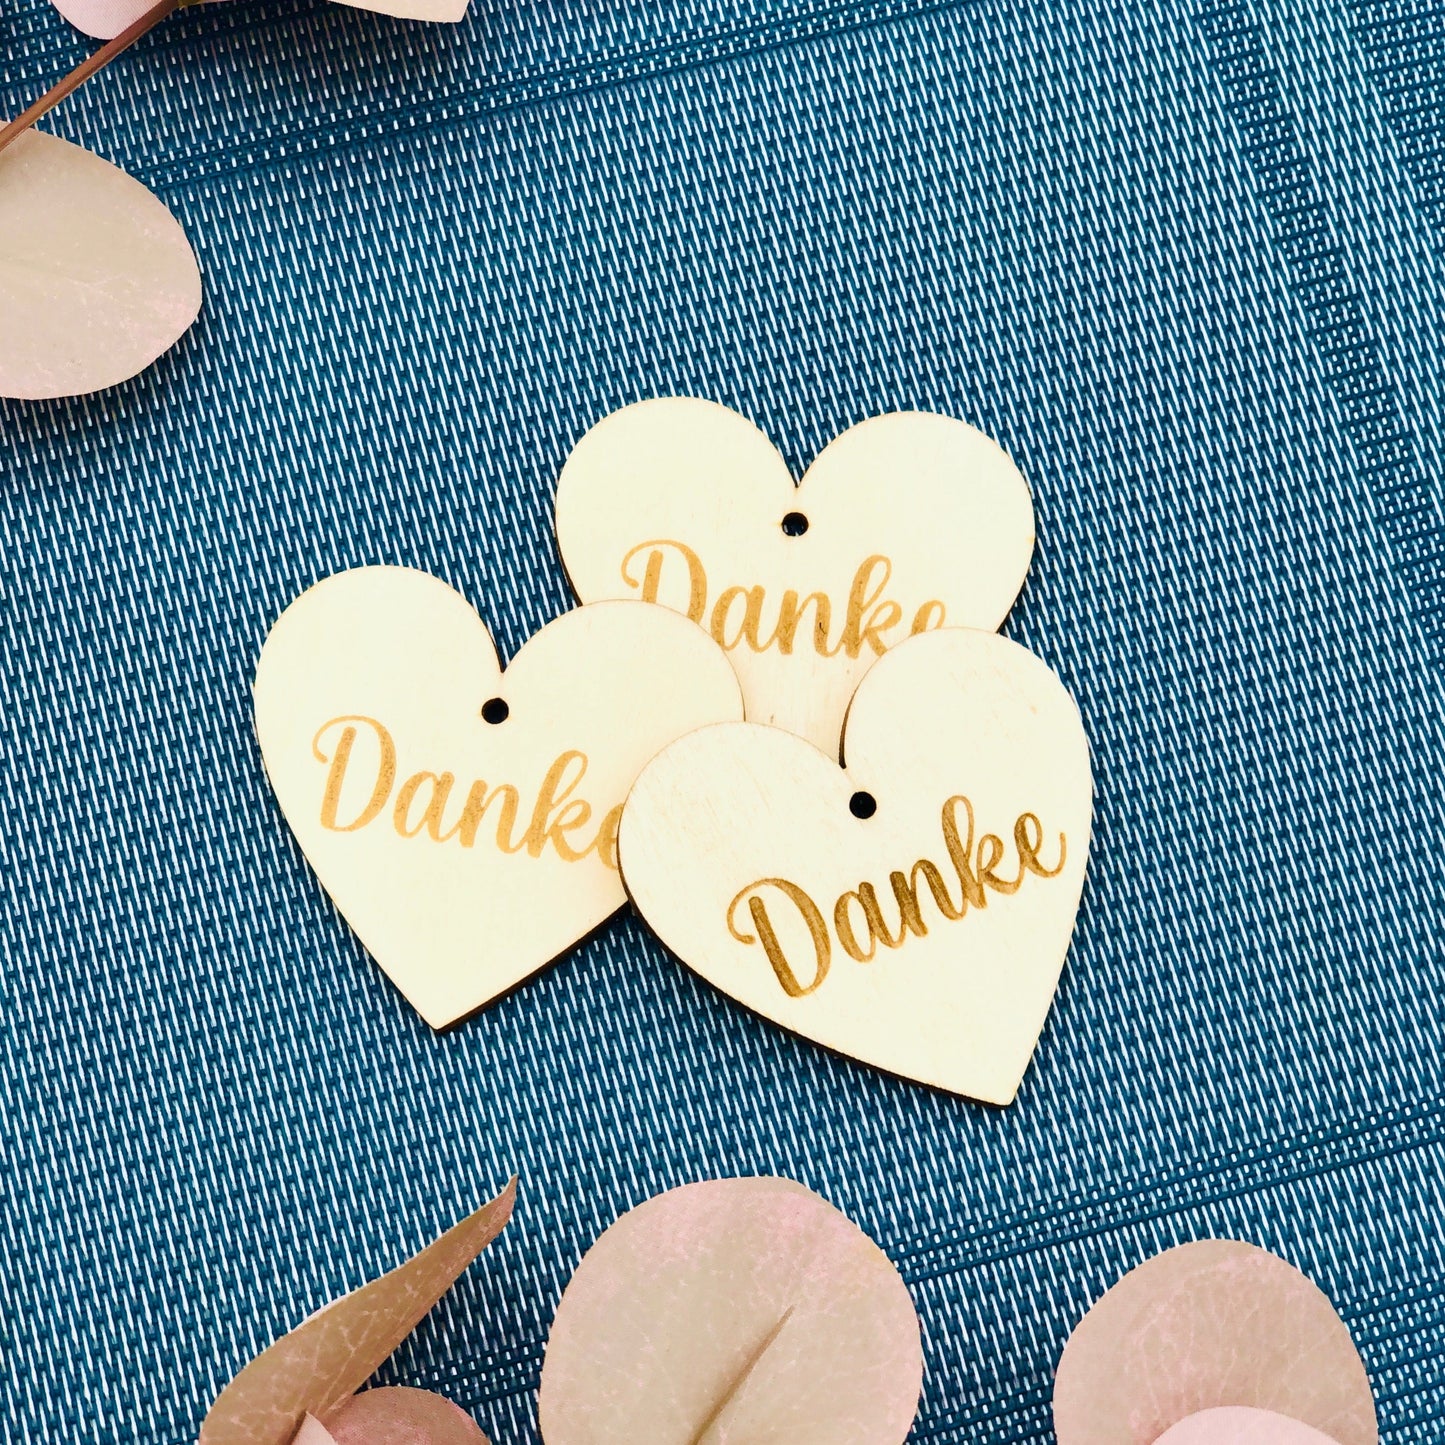 Wooden gift tag - Thank you heart pendant - Personalized wooden gift tag - Thank you in heart shape